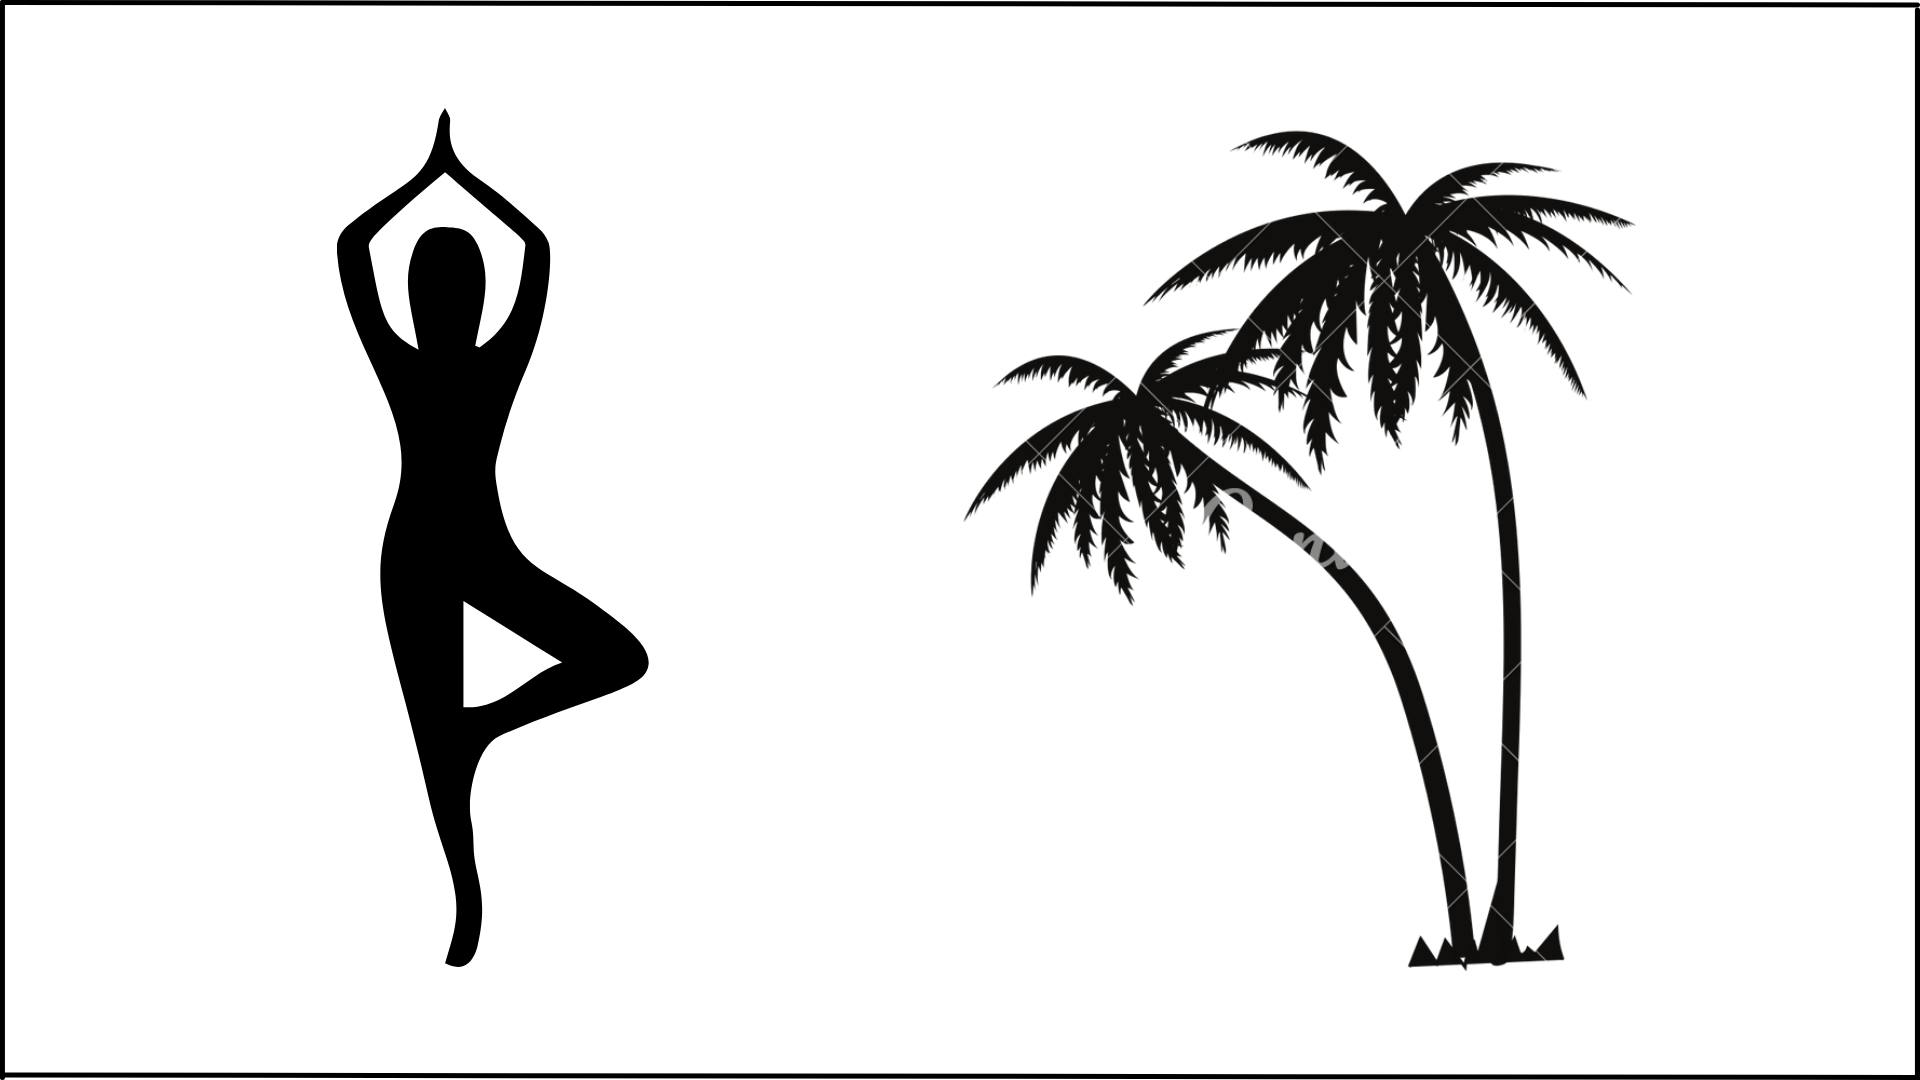 difference-in-size-coconut-tree-man-standing-depth-perception-example-three-dimensional